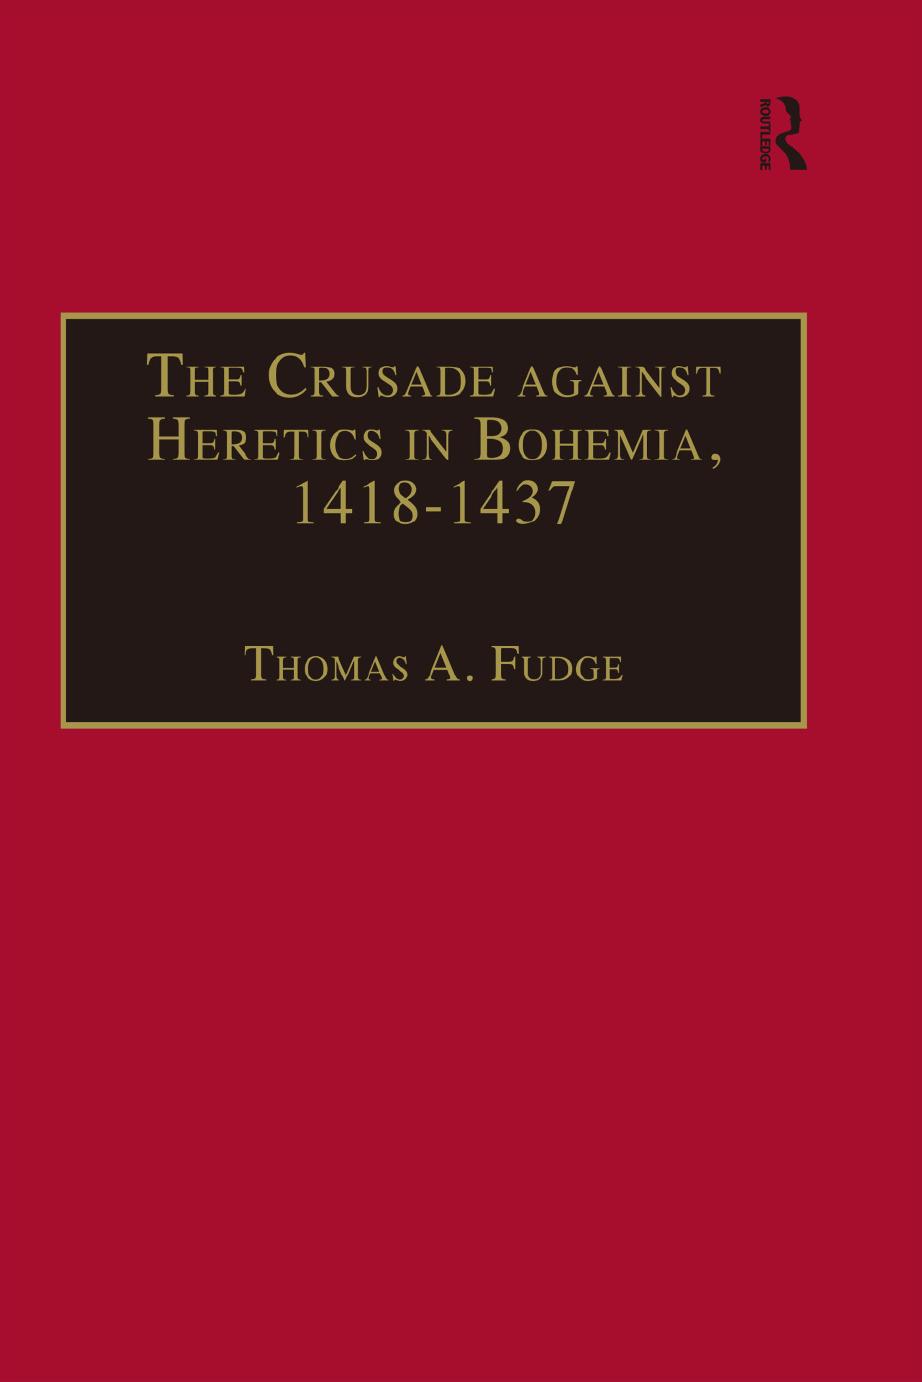 The Crusade Against Heretics in Bohemia, 1418-1437: Sources and Documents for the Hussite Crusades